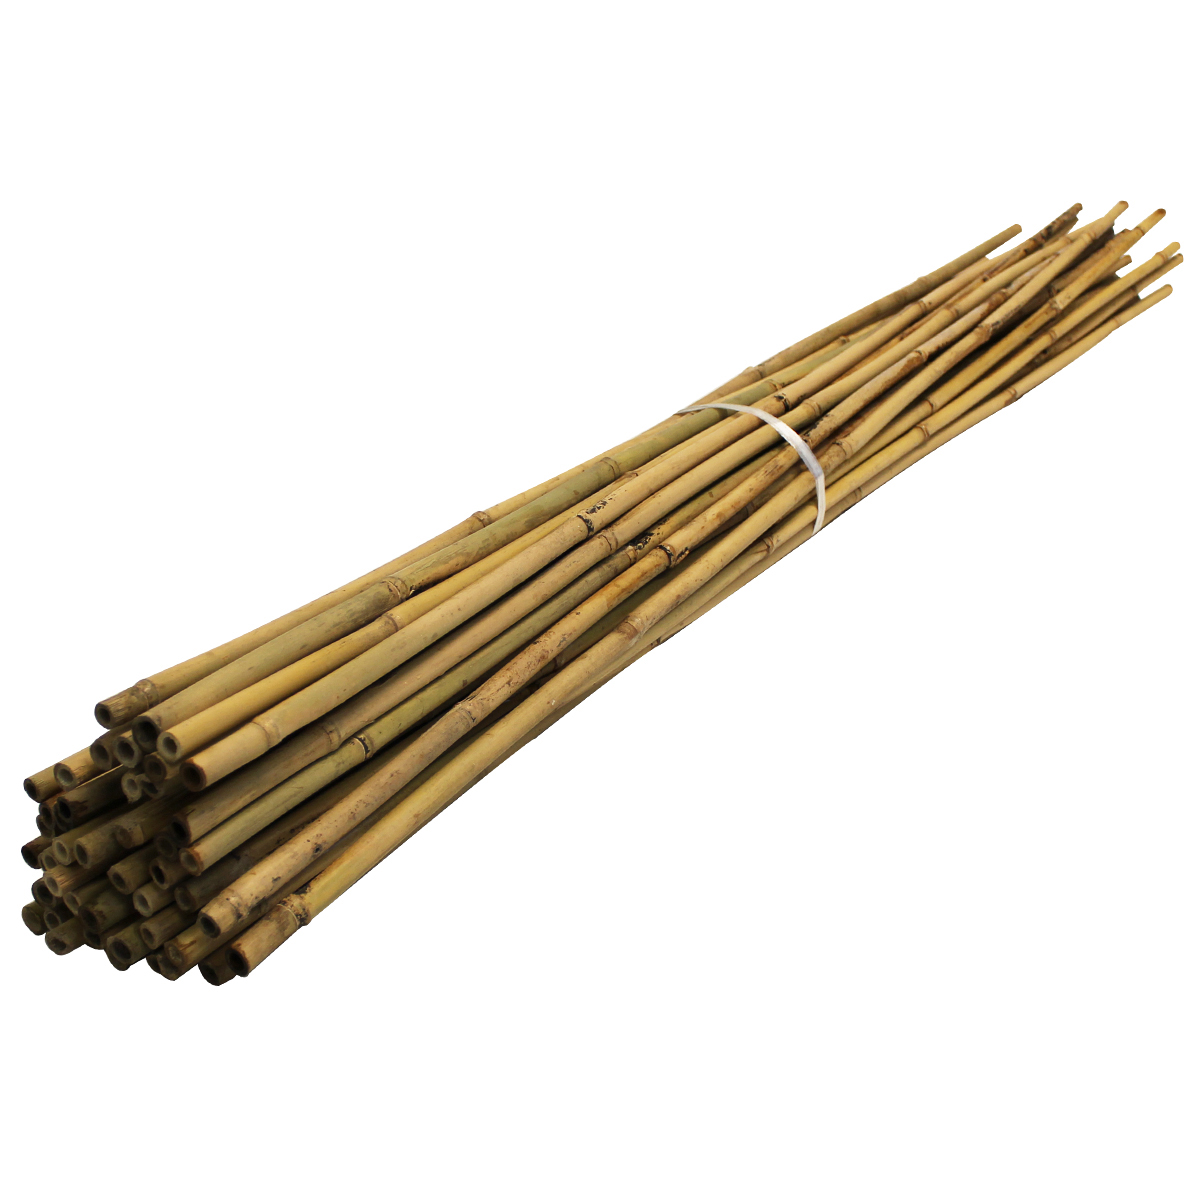 Pack of 25 Bamboo Stick Cambaverd Natural 25 Pcs Bamboo Stakes 3 Feet Bamboo Plant Stakes for Roma Tomatoes Sunflowers Bamboo Pole Beans Trees Potted and Climbing Plants 